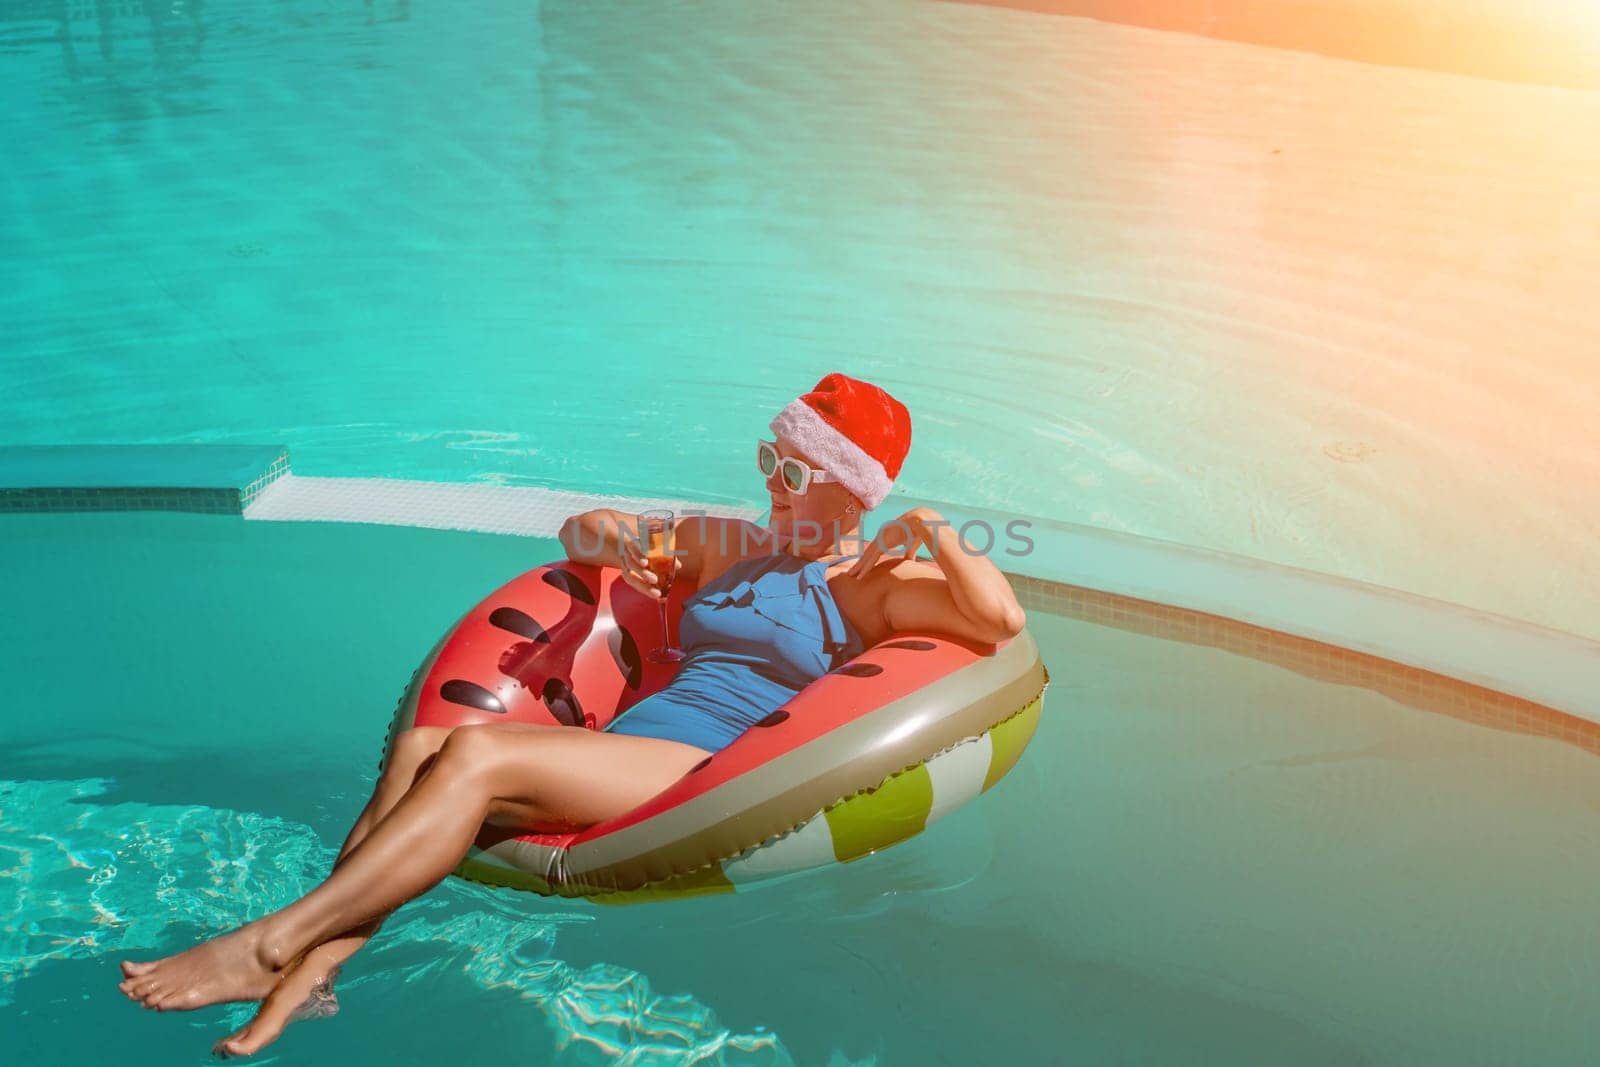 A happy woman in a blue bikini, a red and white Santa hat and sunglasses poses in the pool in an inflatable circle with a watermelon pattern, holding a glass of champagne in her hands. Christmas holidays concept. by Matiunina